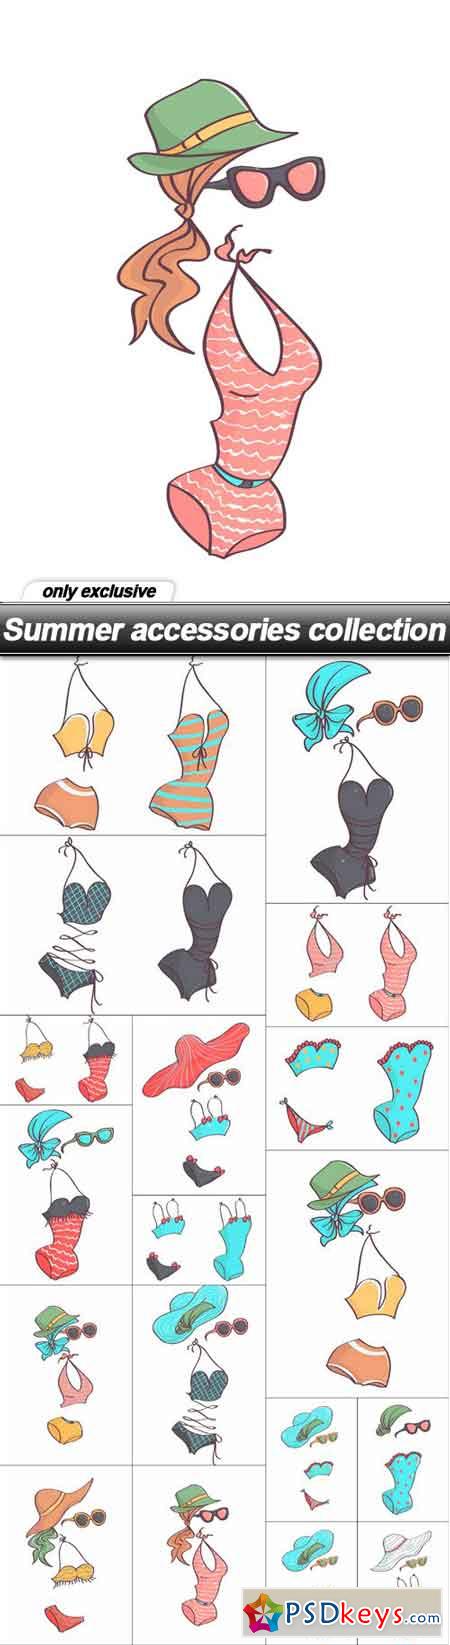 Summer accessories collection - 18 EPS